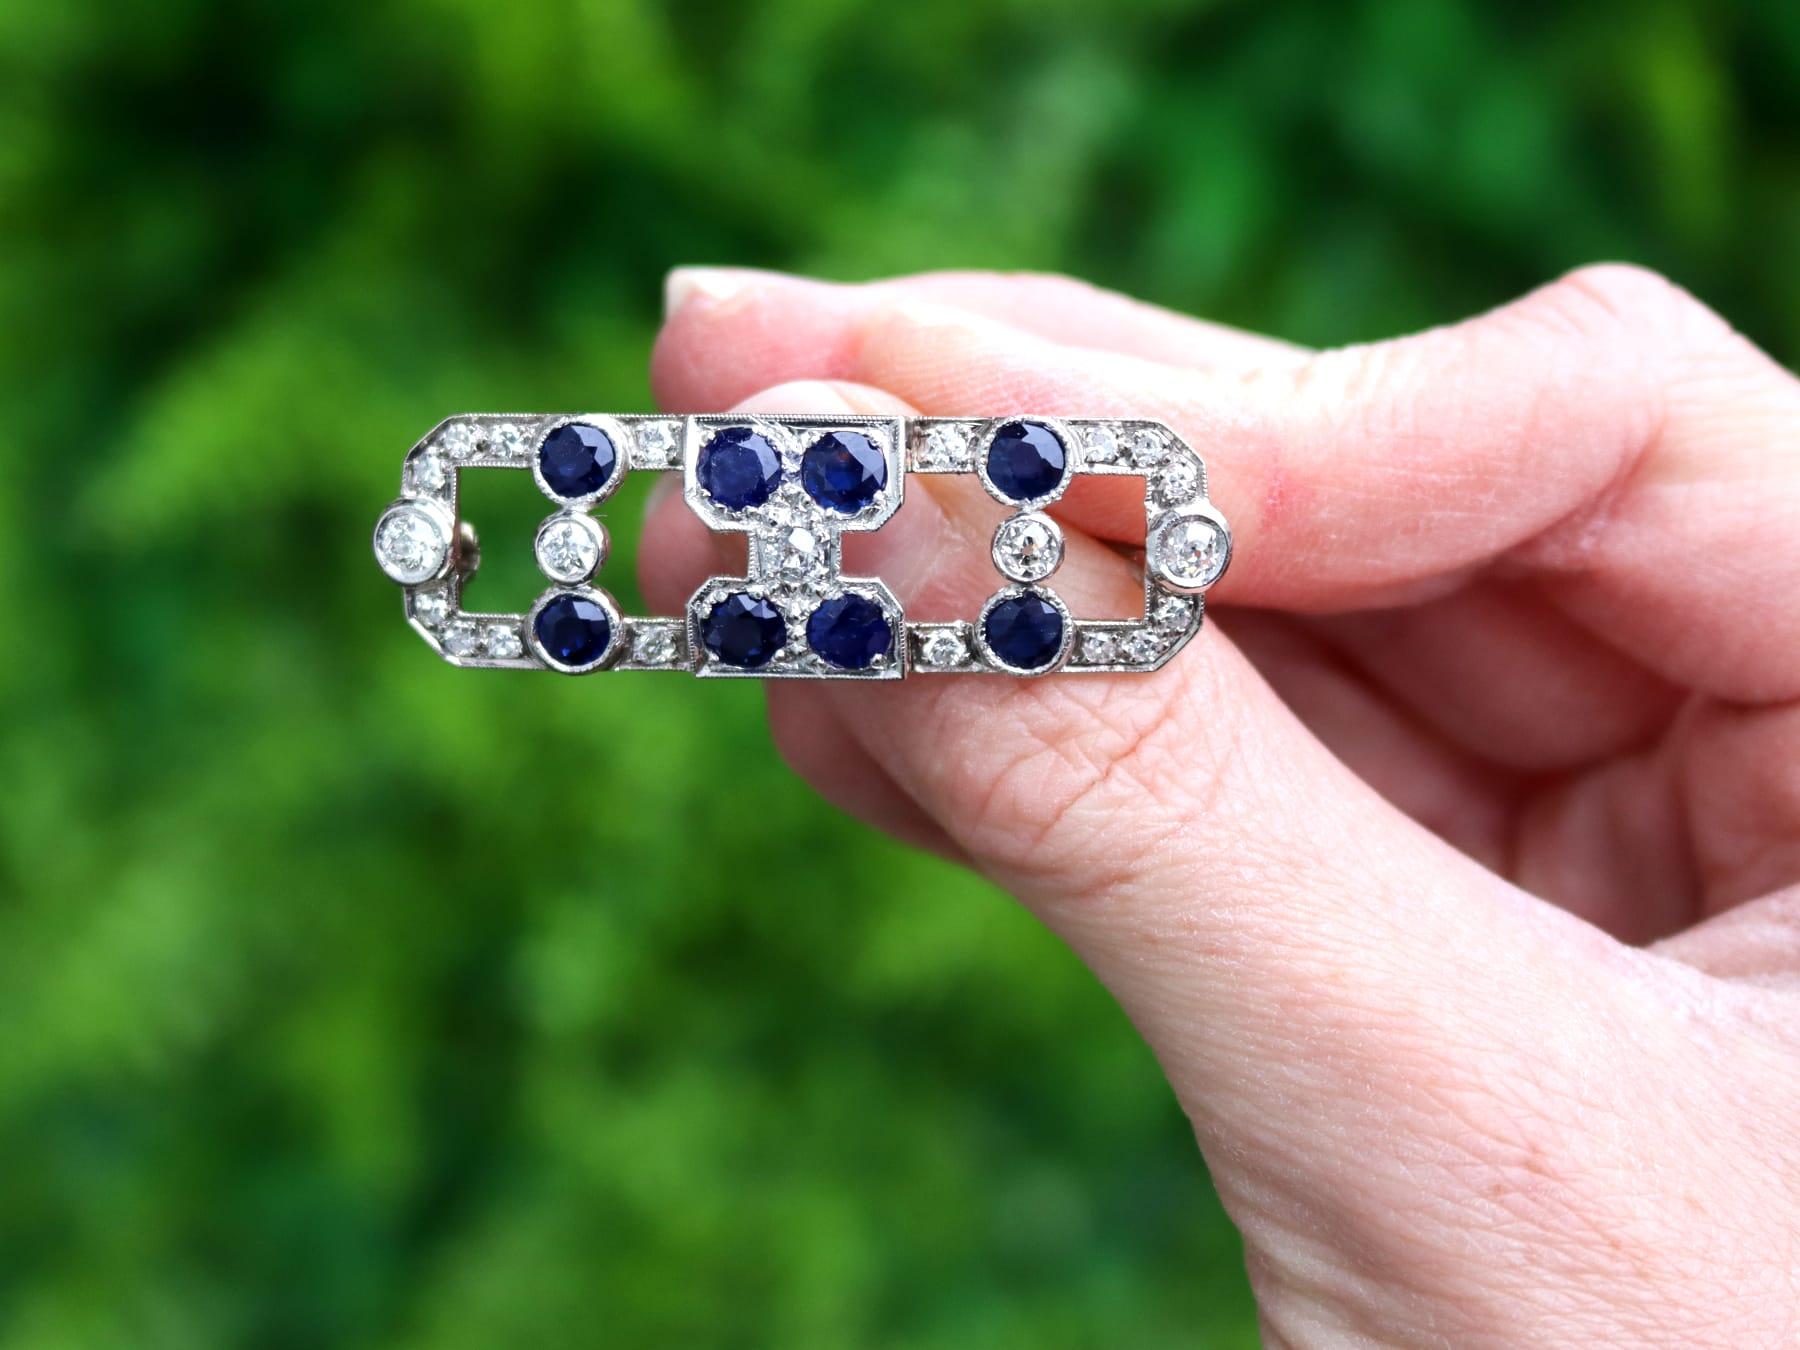 A fine and impressive antique Art Deco 1.70 carat diamond and 3.20 carat sapphire, 15k white gold and platinum set brooch; part of our diverse antique jewelry and estate jewelry collections.

This stunning, fine and impressive antique brooch has